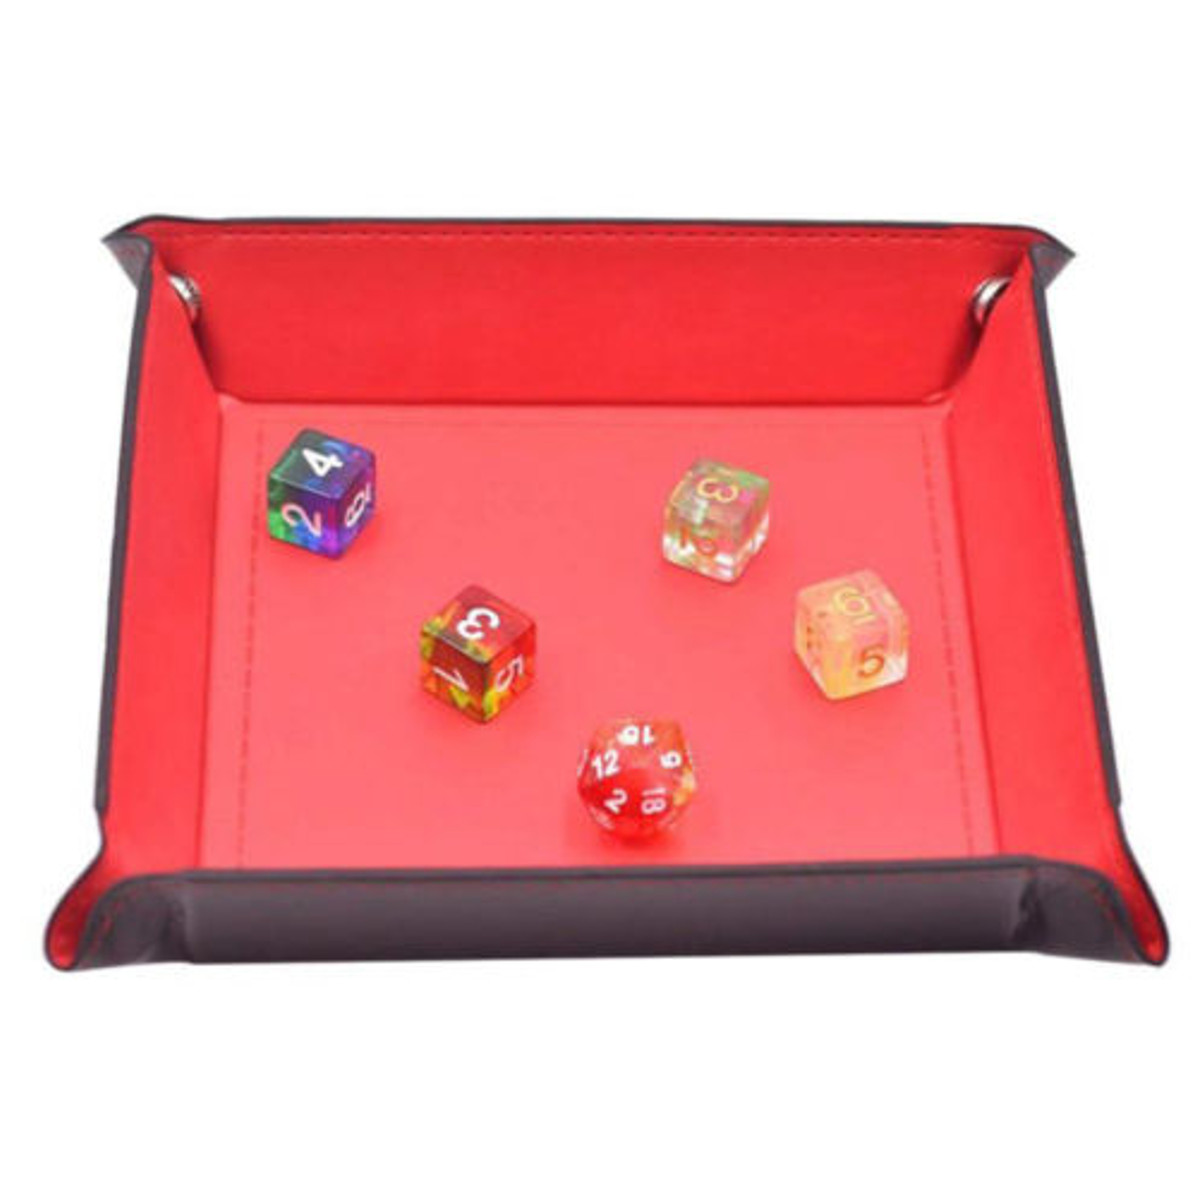 Dice-Tray-PU-Tabletop-RPG-Foldable-Dice-Holder-Storage-Box-For-DnD-Board-Games-1461268